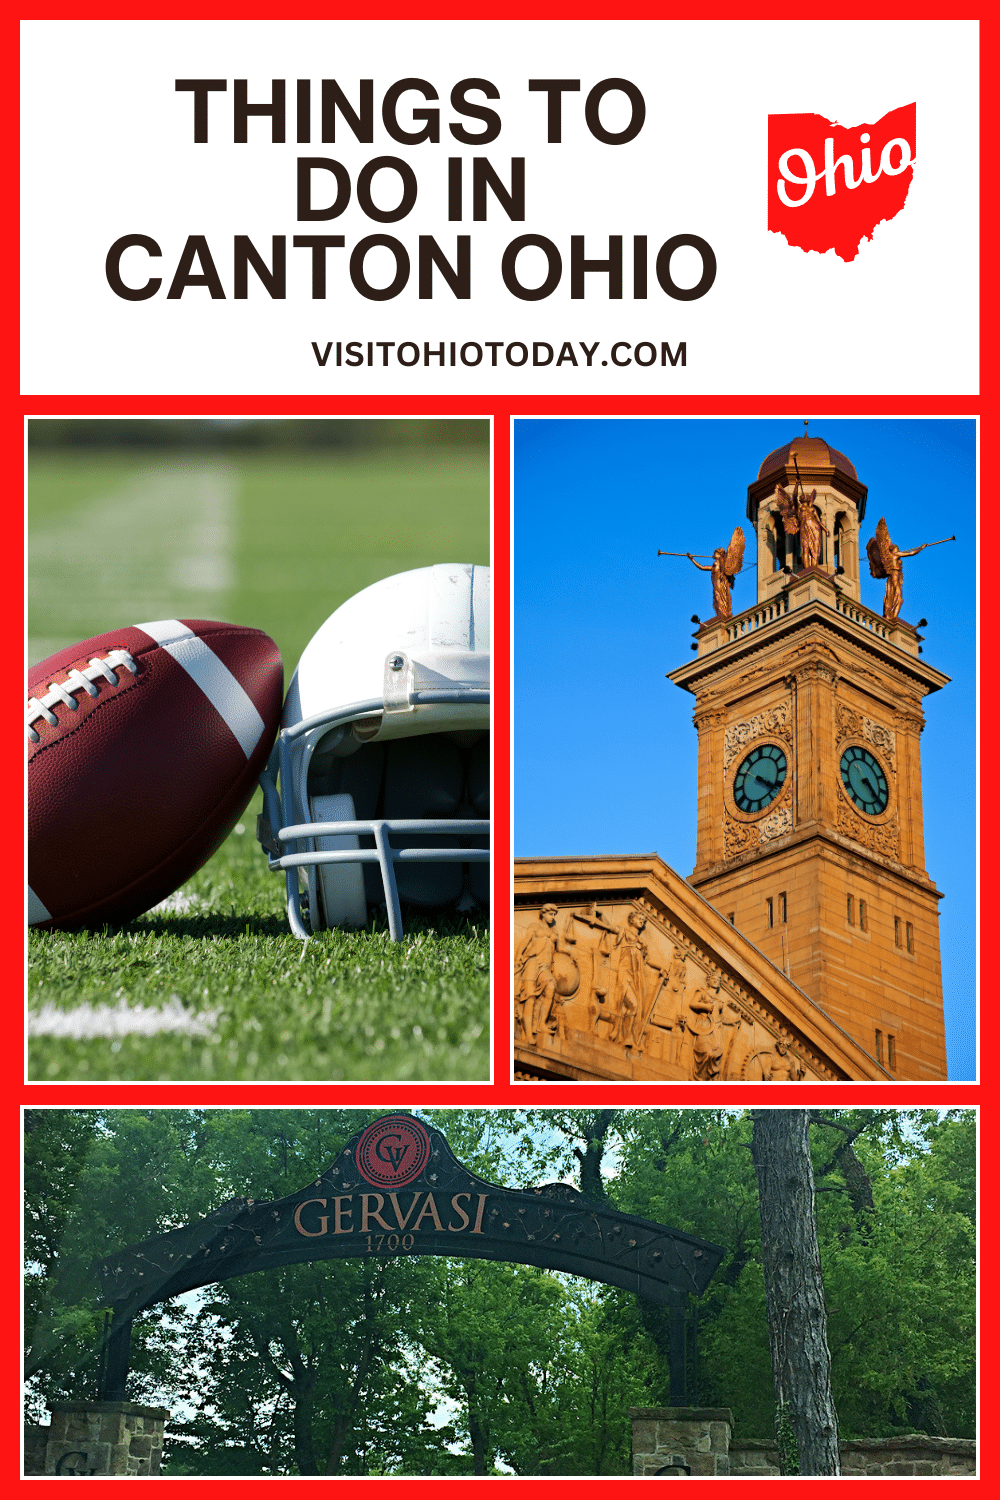 Canton located in Stark County, Ohio has many things to do! With museums, amusement parks, nature parks, and more!